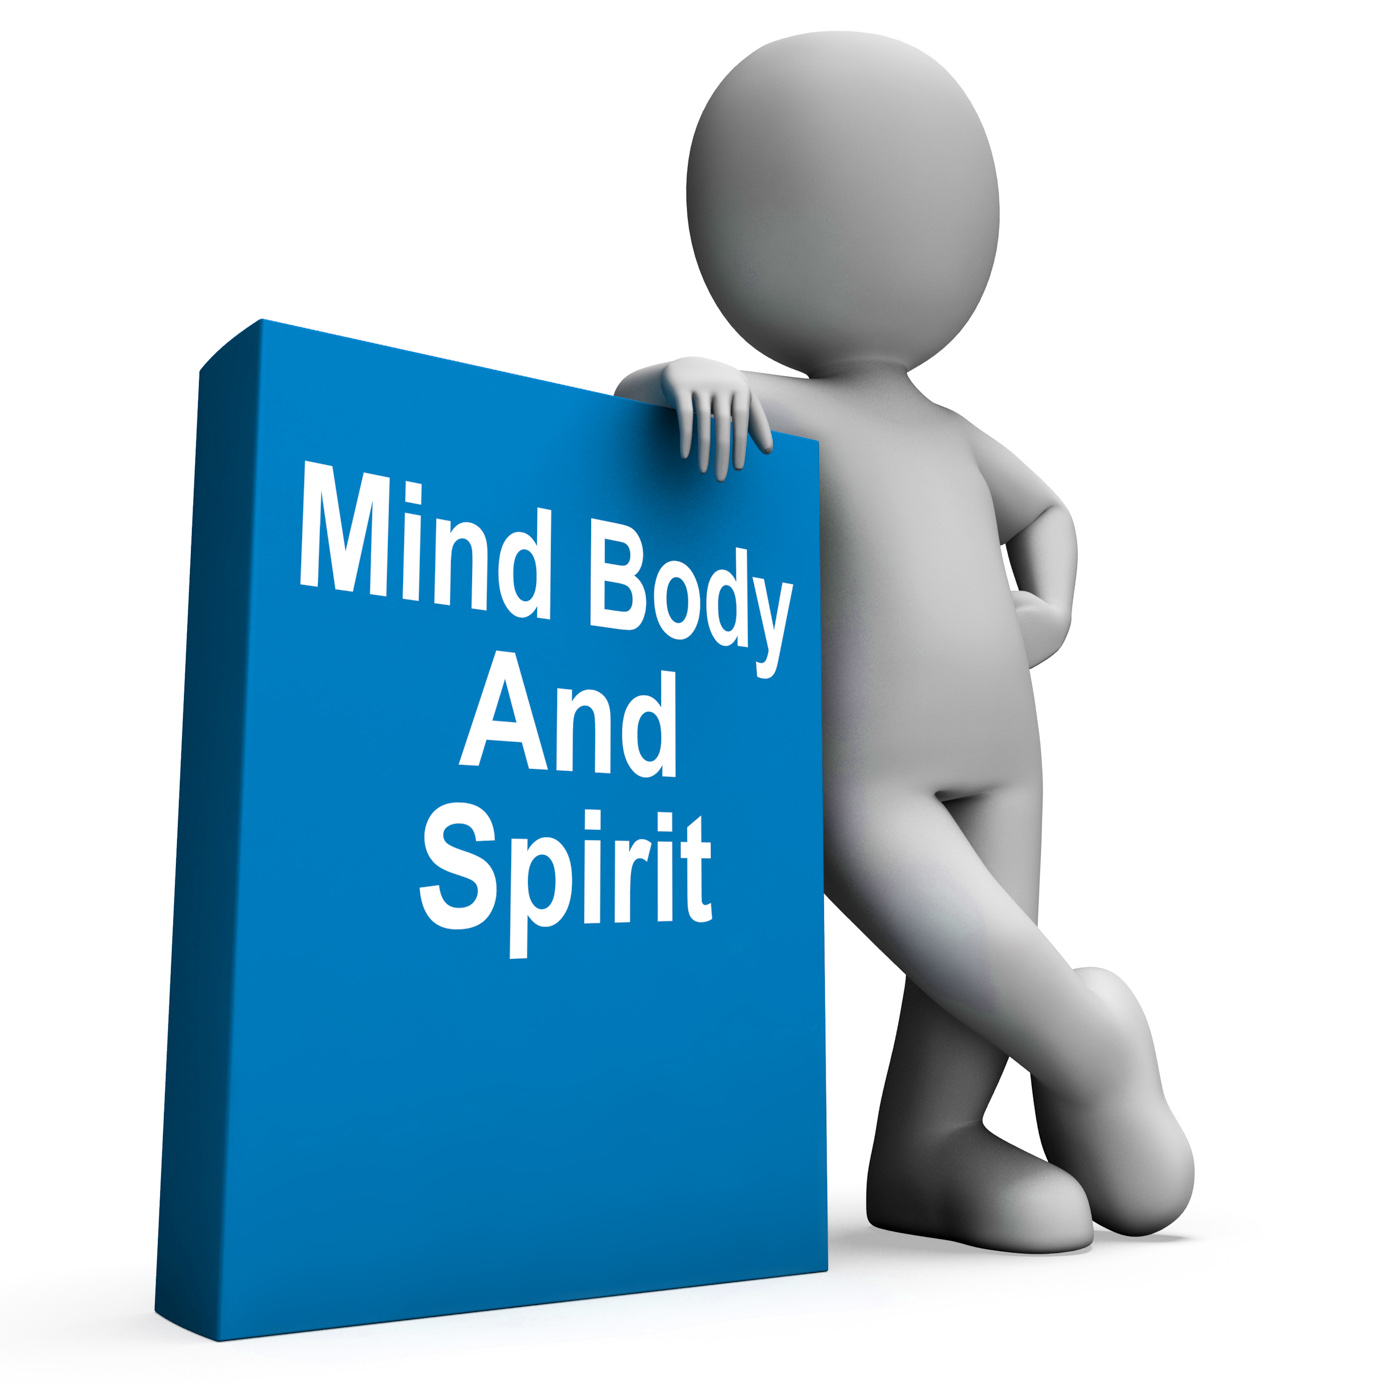 Mind body and spirit book with character shows holistic books photo